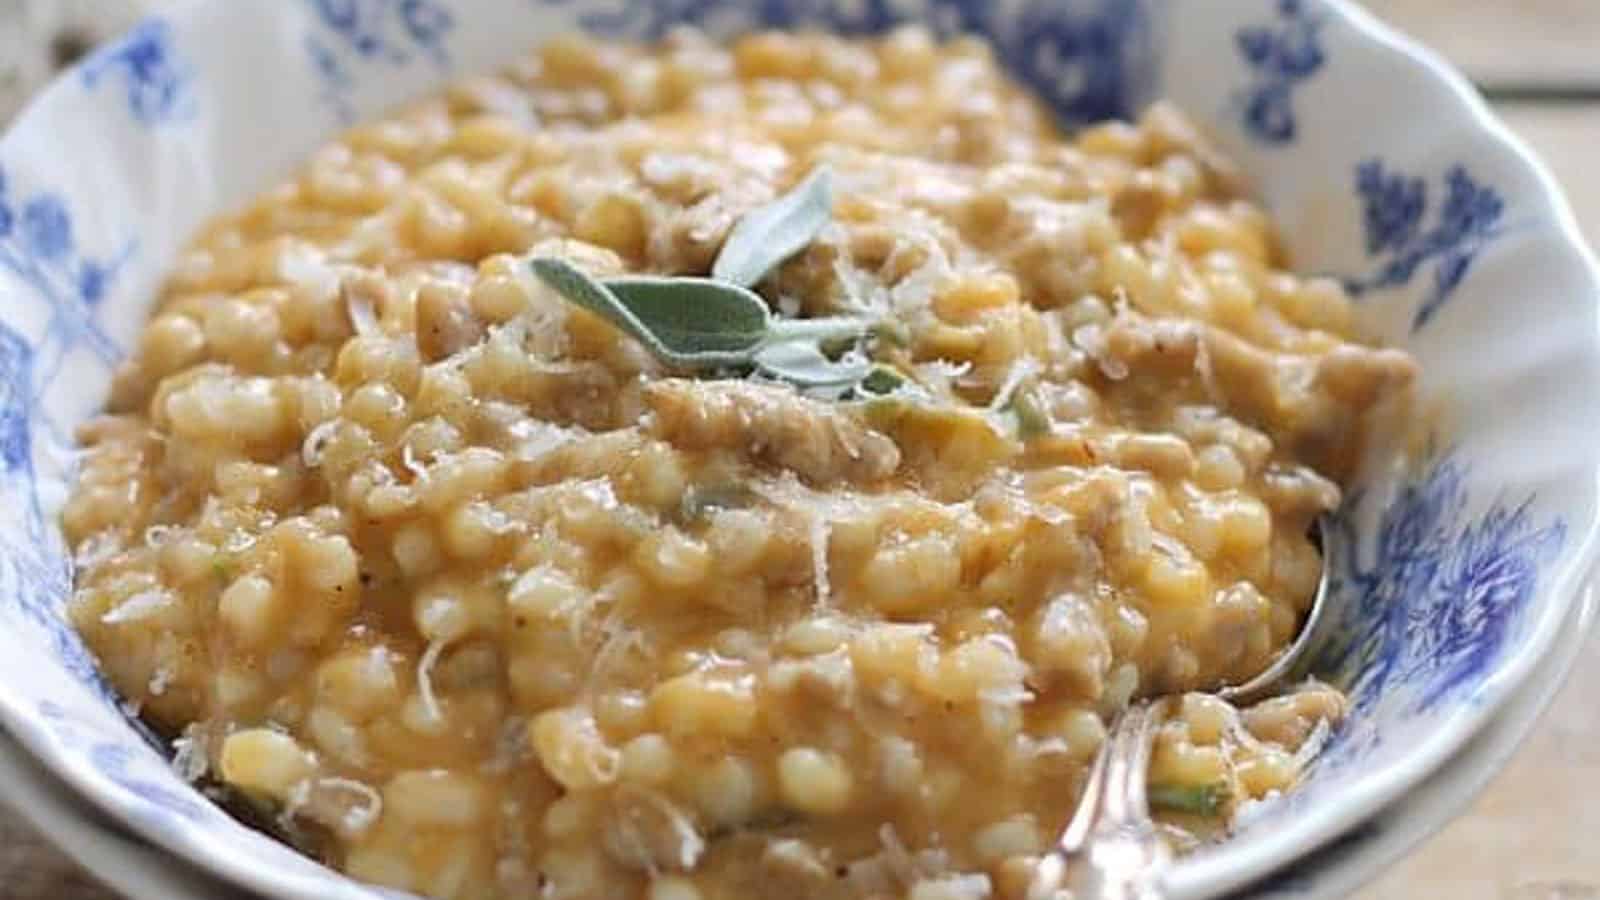 Creamy pumpkin barley with sausage garnished with fresh sage leaves and grated parmesan in a bowl with a spoon.